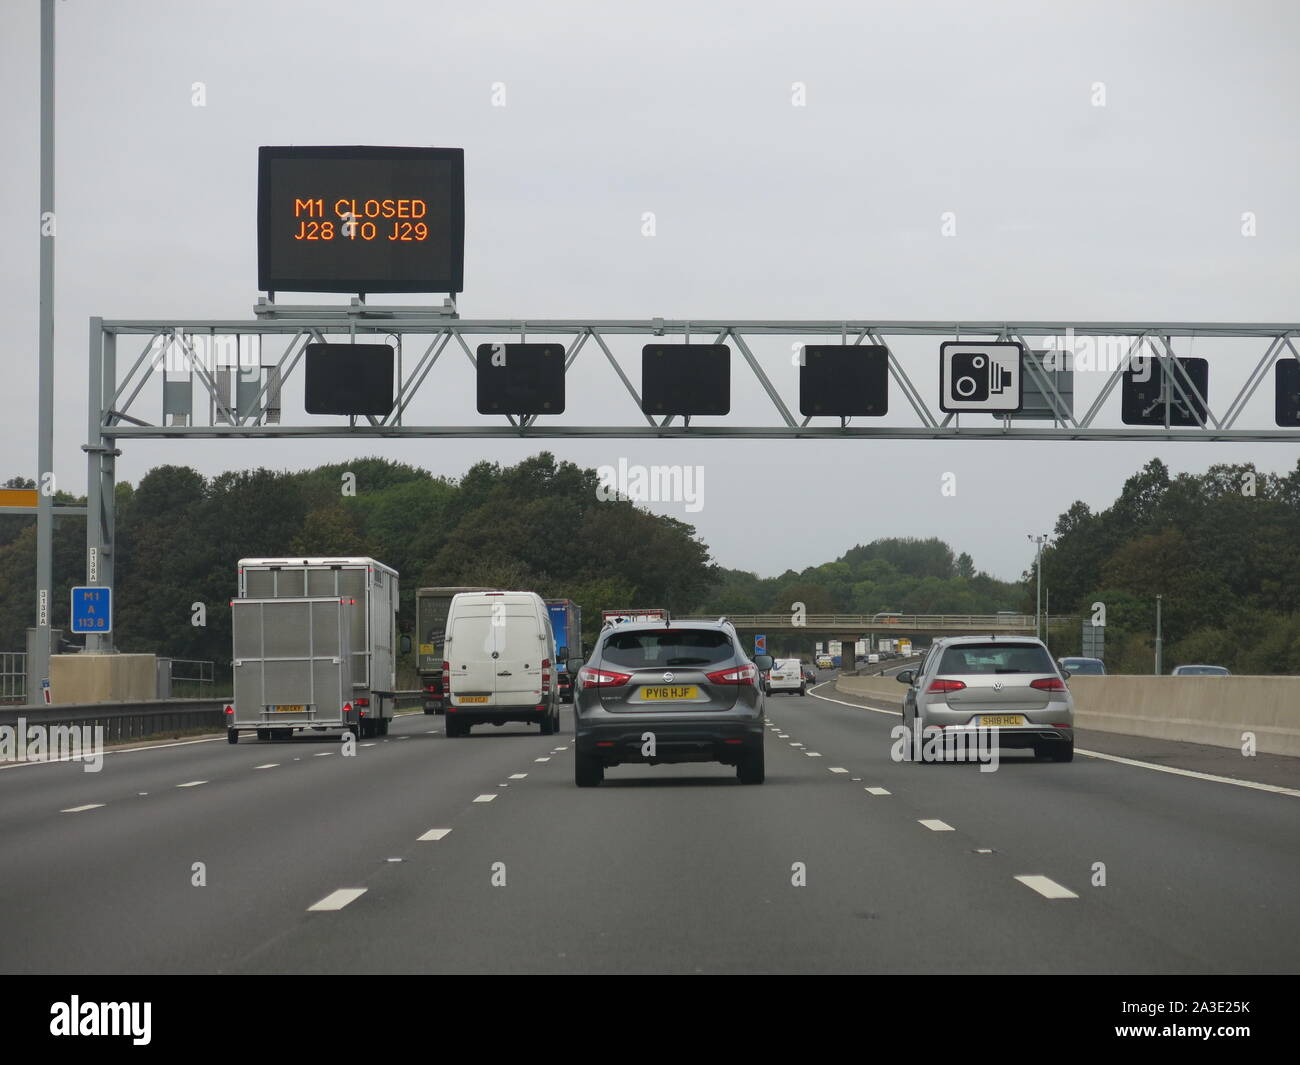 Electronic overhead gantry sign indicates that the northbound M1 is closed between junctions 28 and 29. Stock Photo